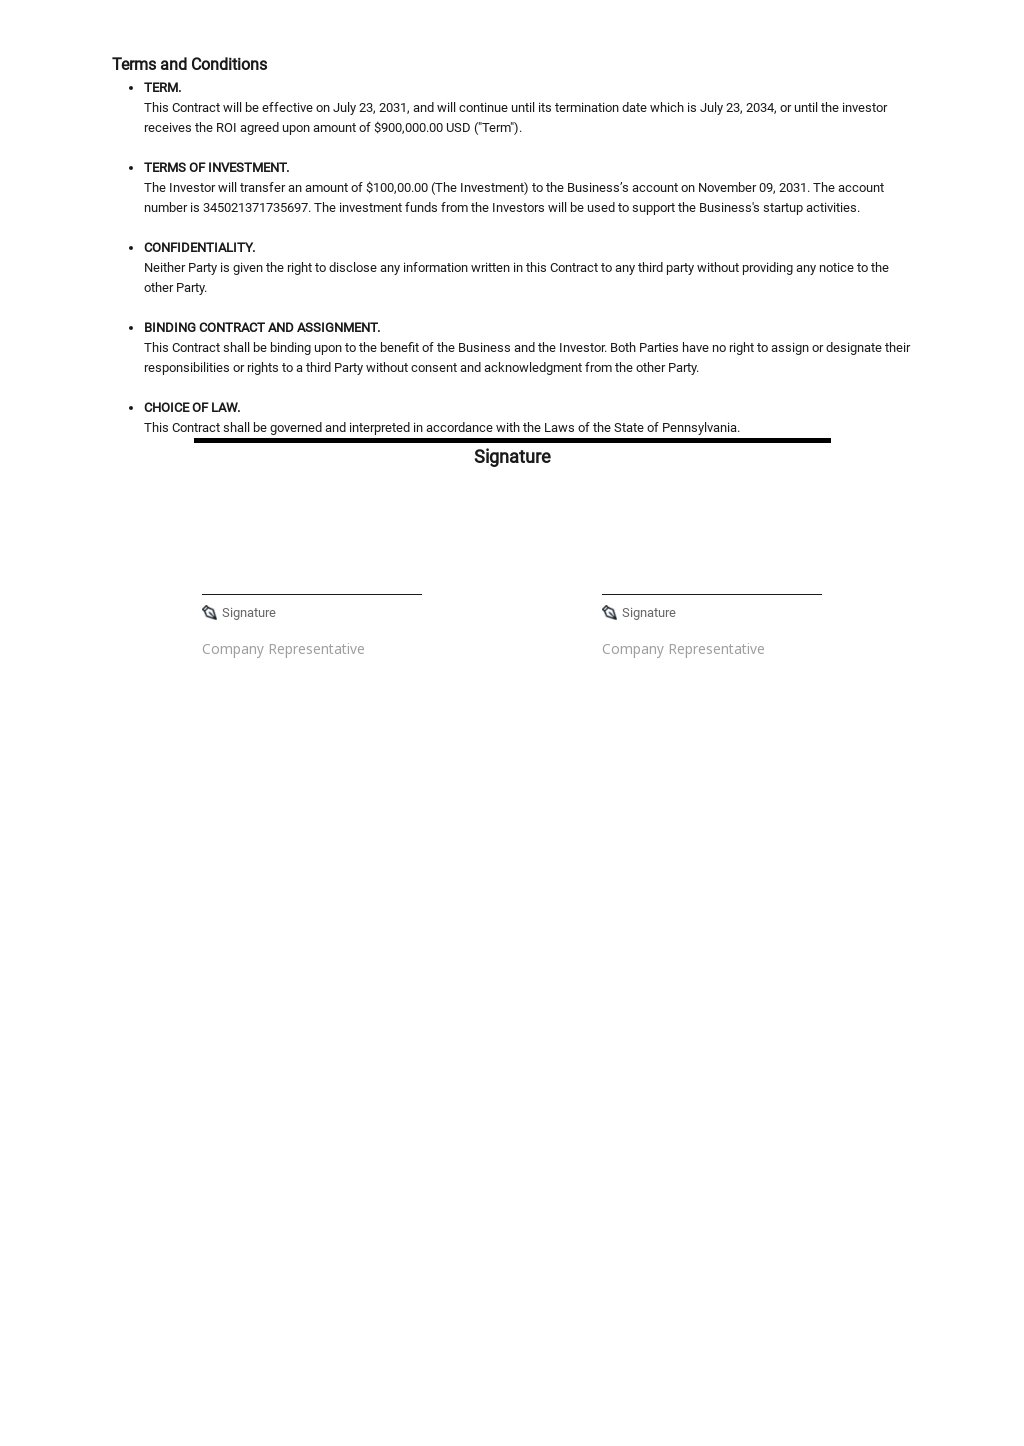 Startup Investment Contract Template 1.jpe